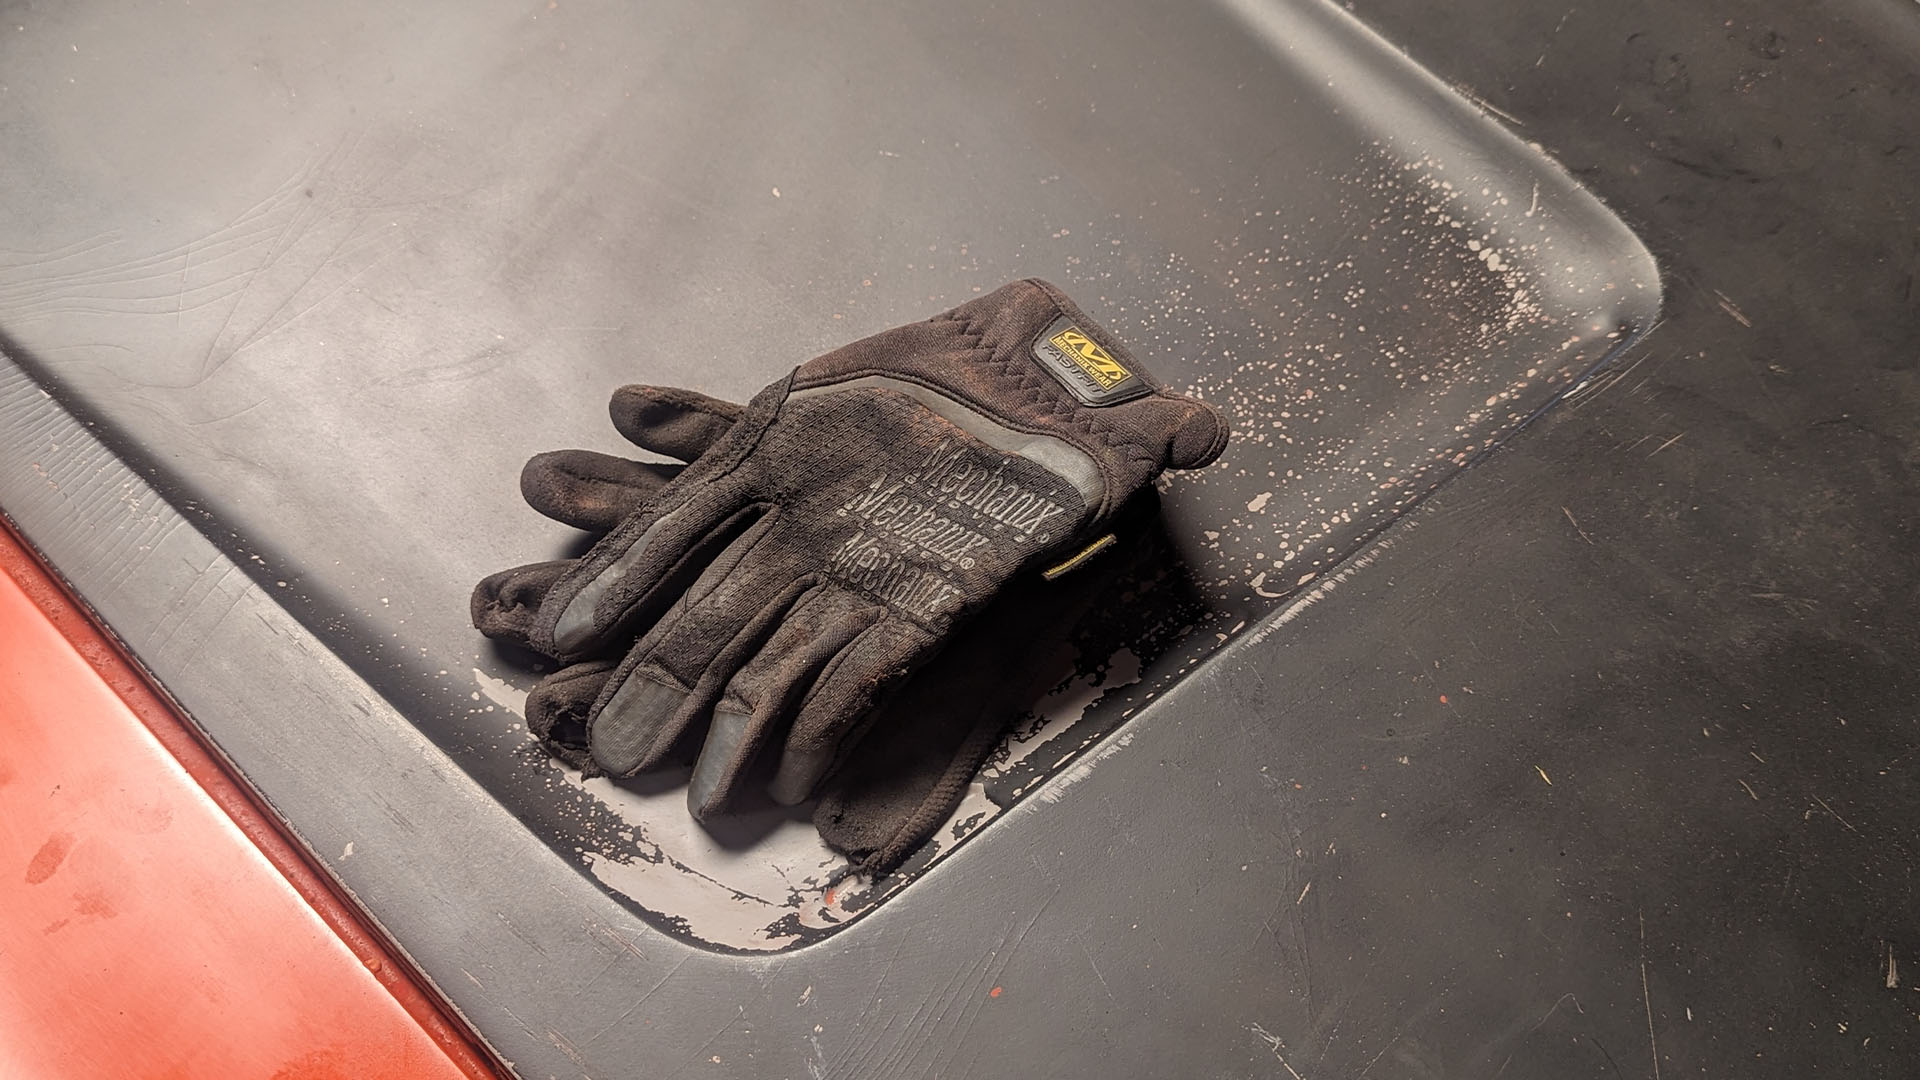 Best Automotive Gloves For Working on Cars 